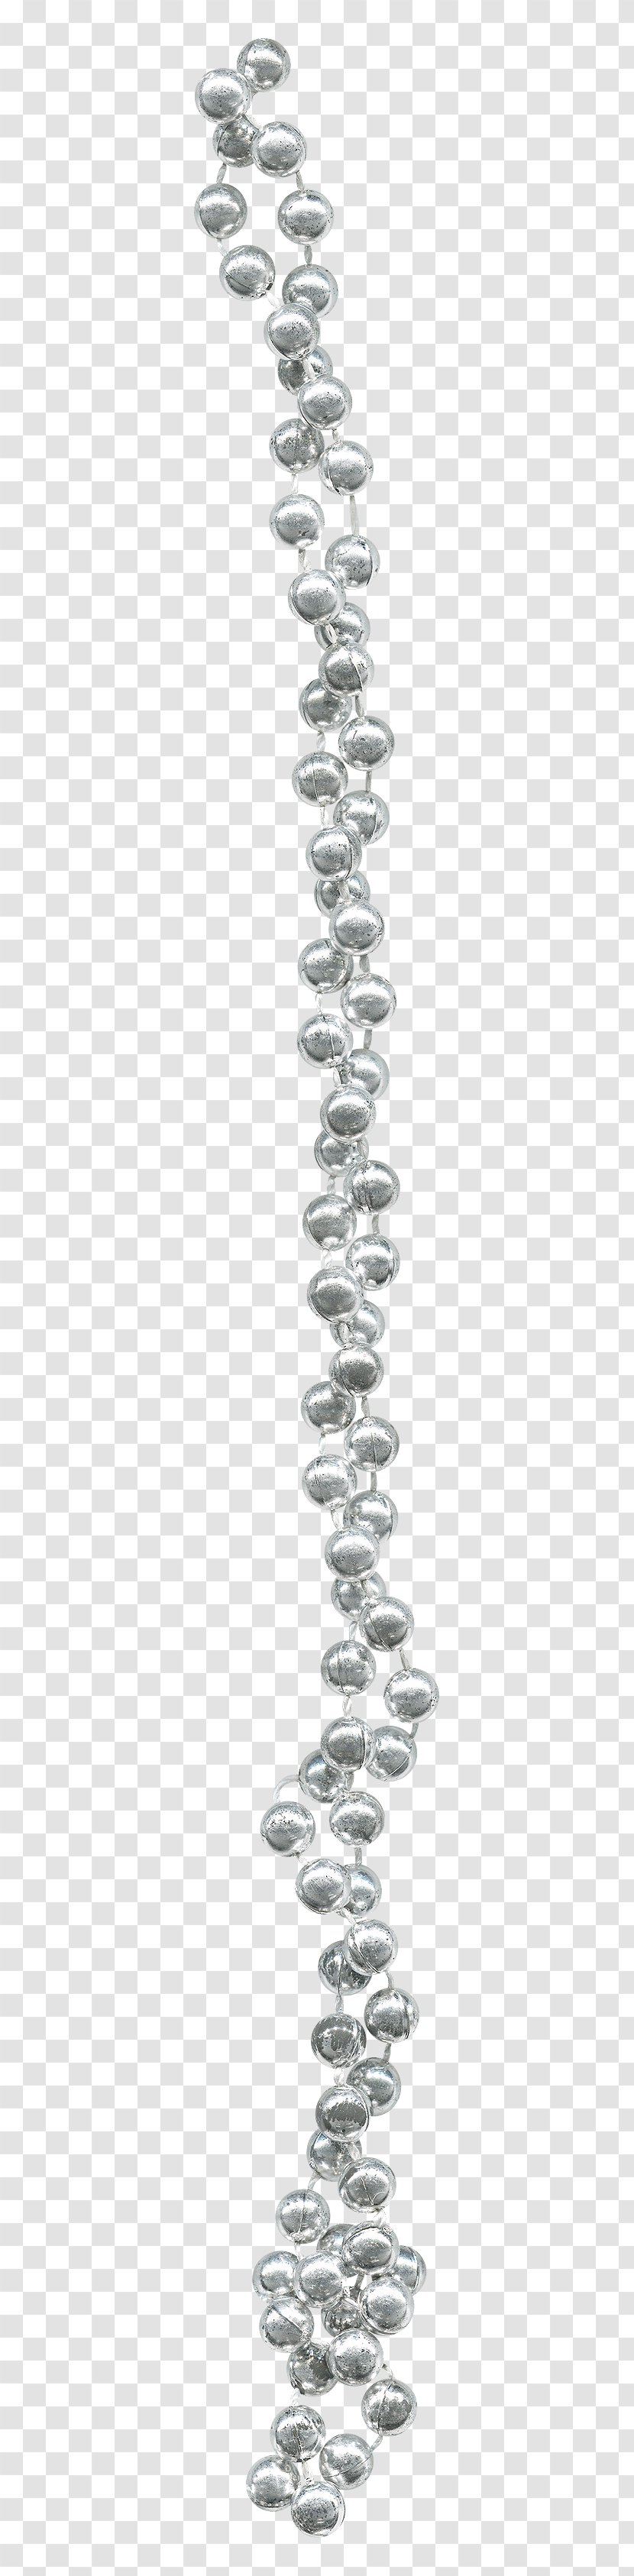 Silver Bead Download - Google Images - Beautiful Beads Transparent PNG